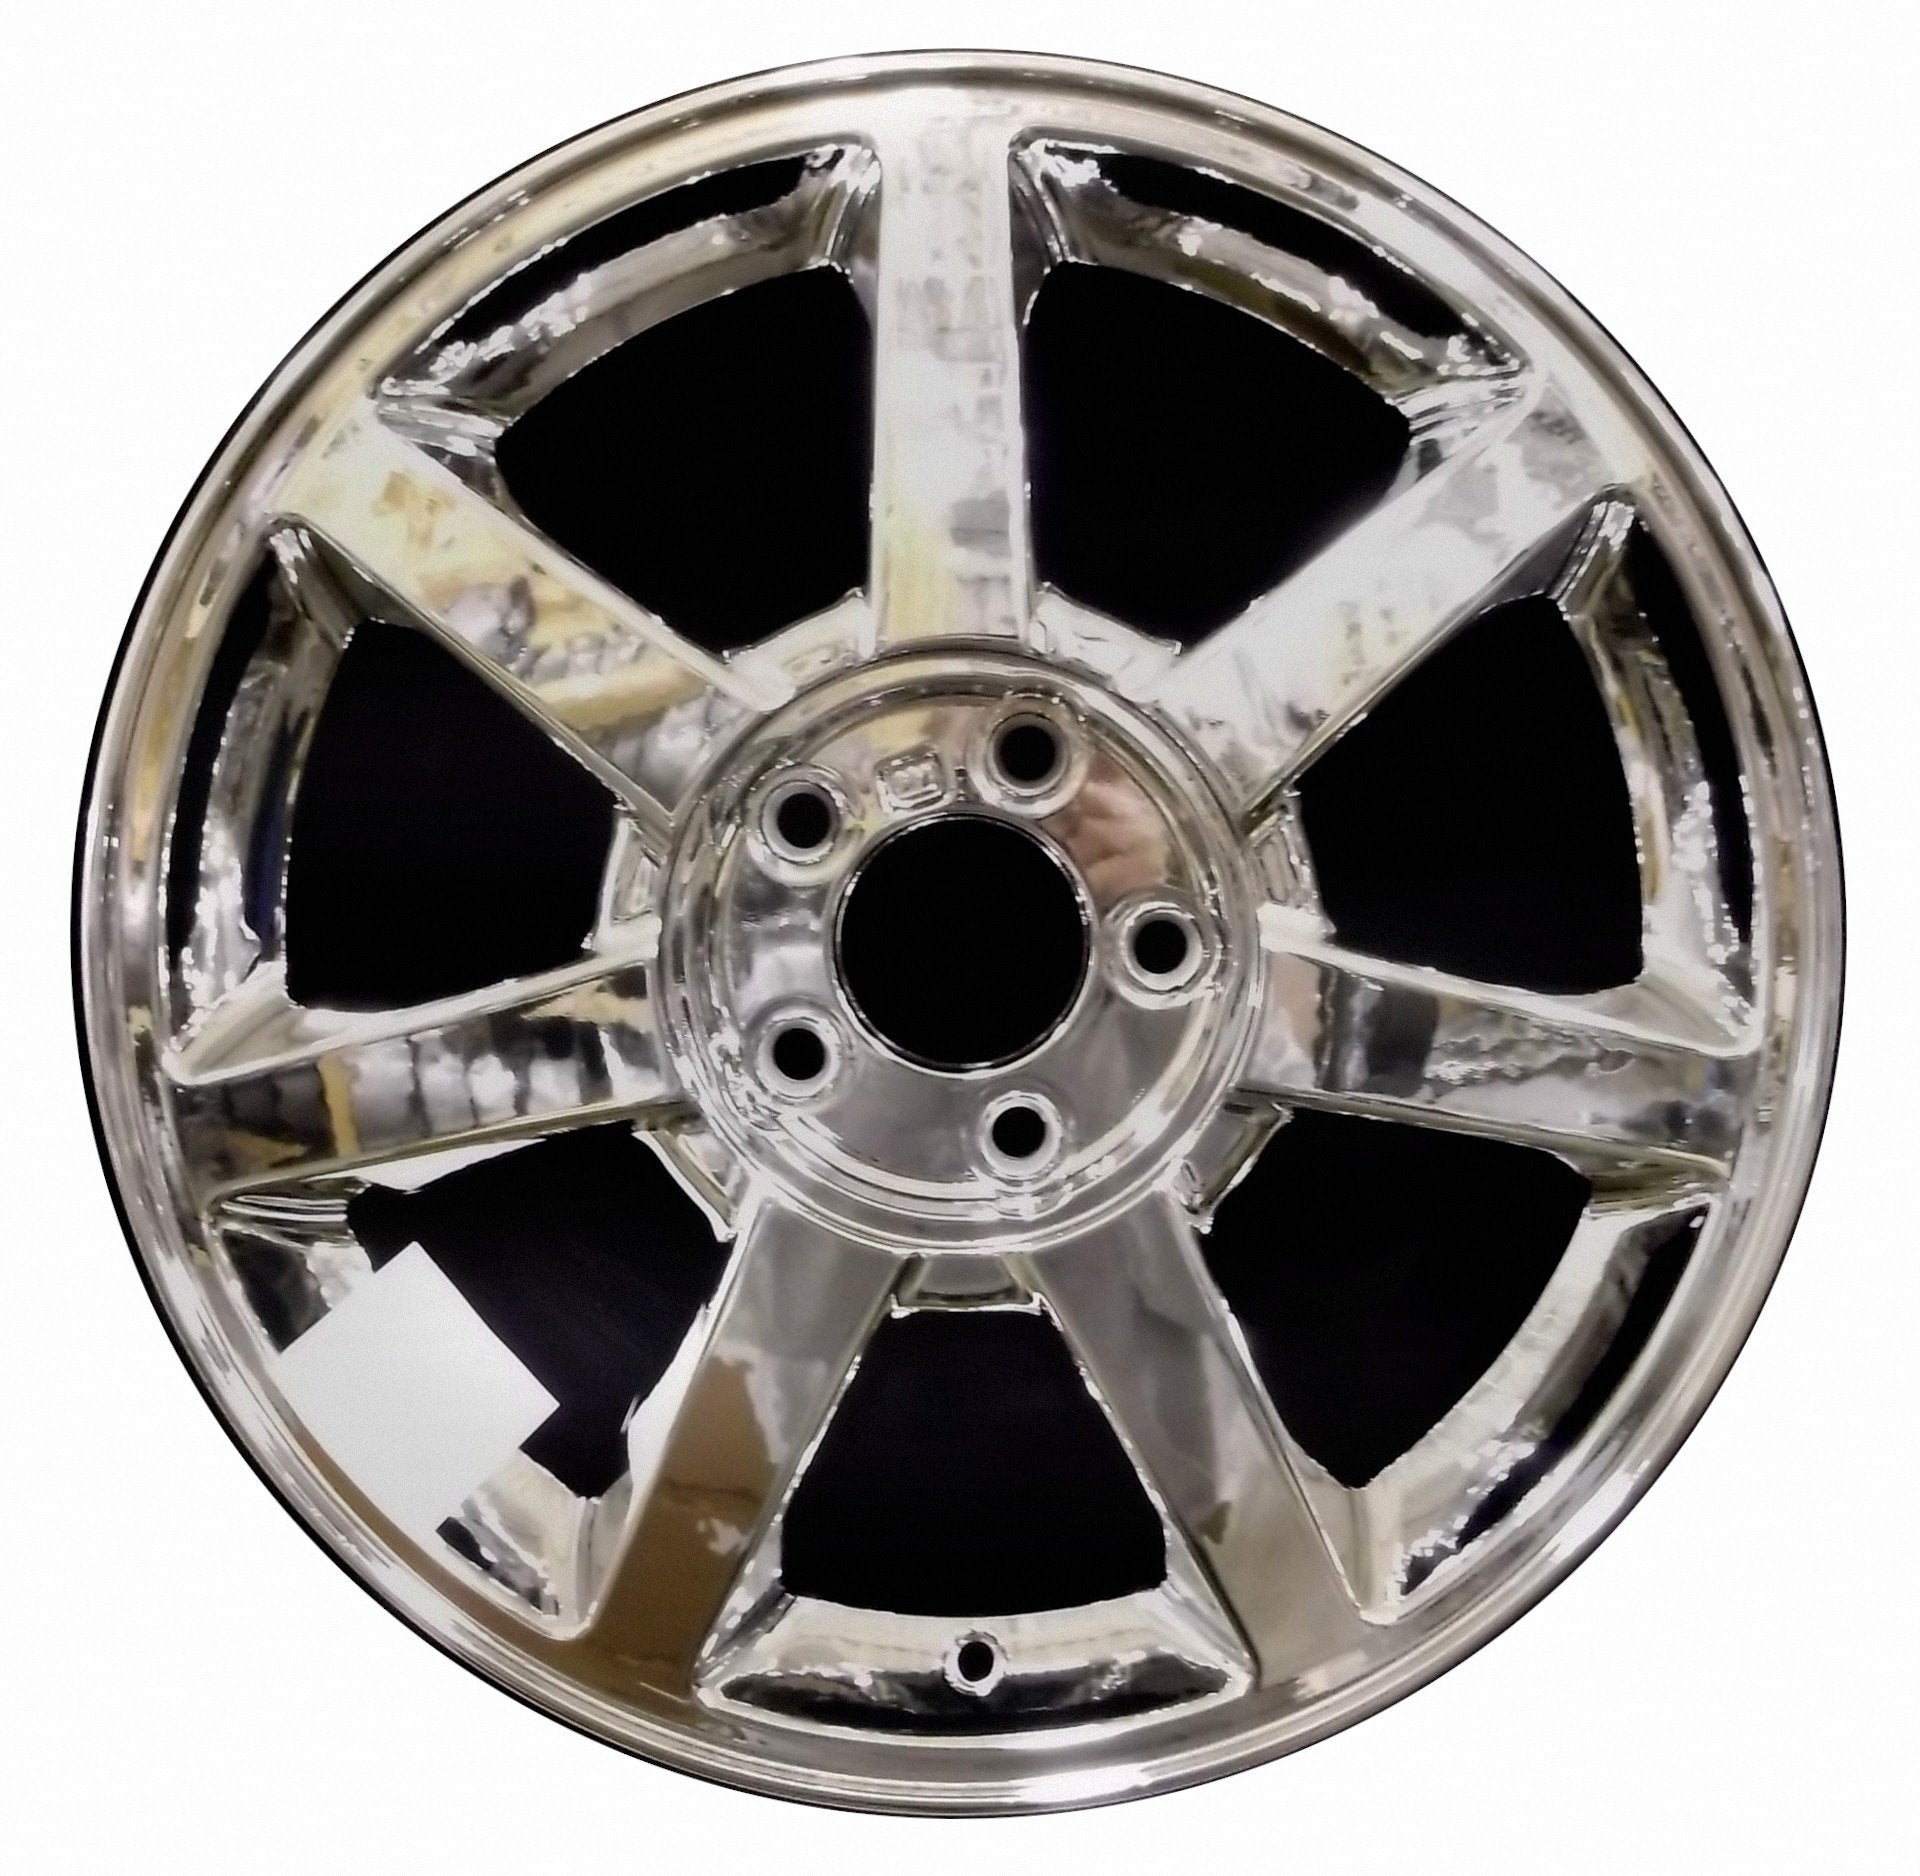 Cadillac STS  2004, 2005, 2006, 2007, 2008, 2009, 2010, 2011 Factory OEM Car Wheel Size 17x7.5 Alloy WAO.4578FT.PVD1.FF